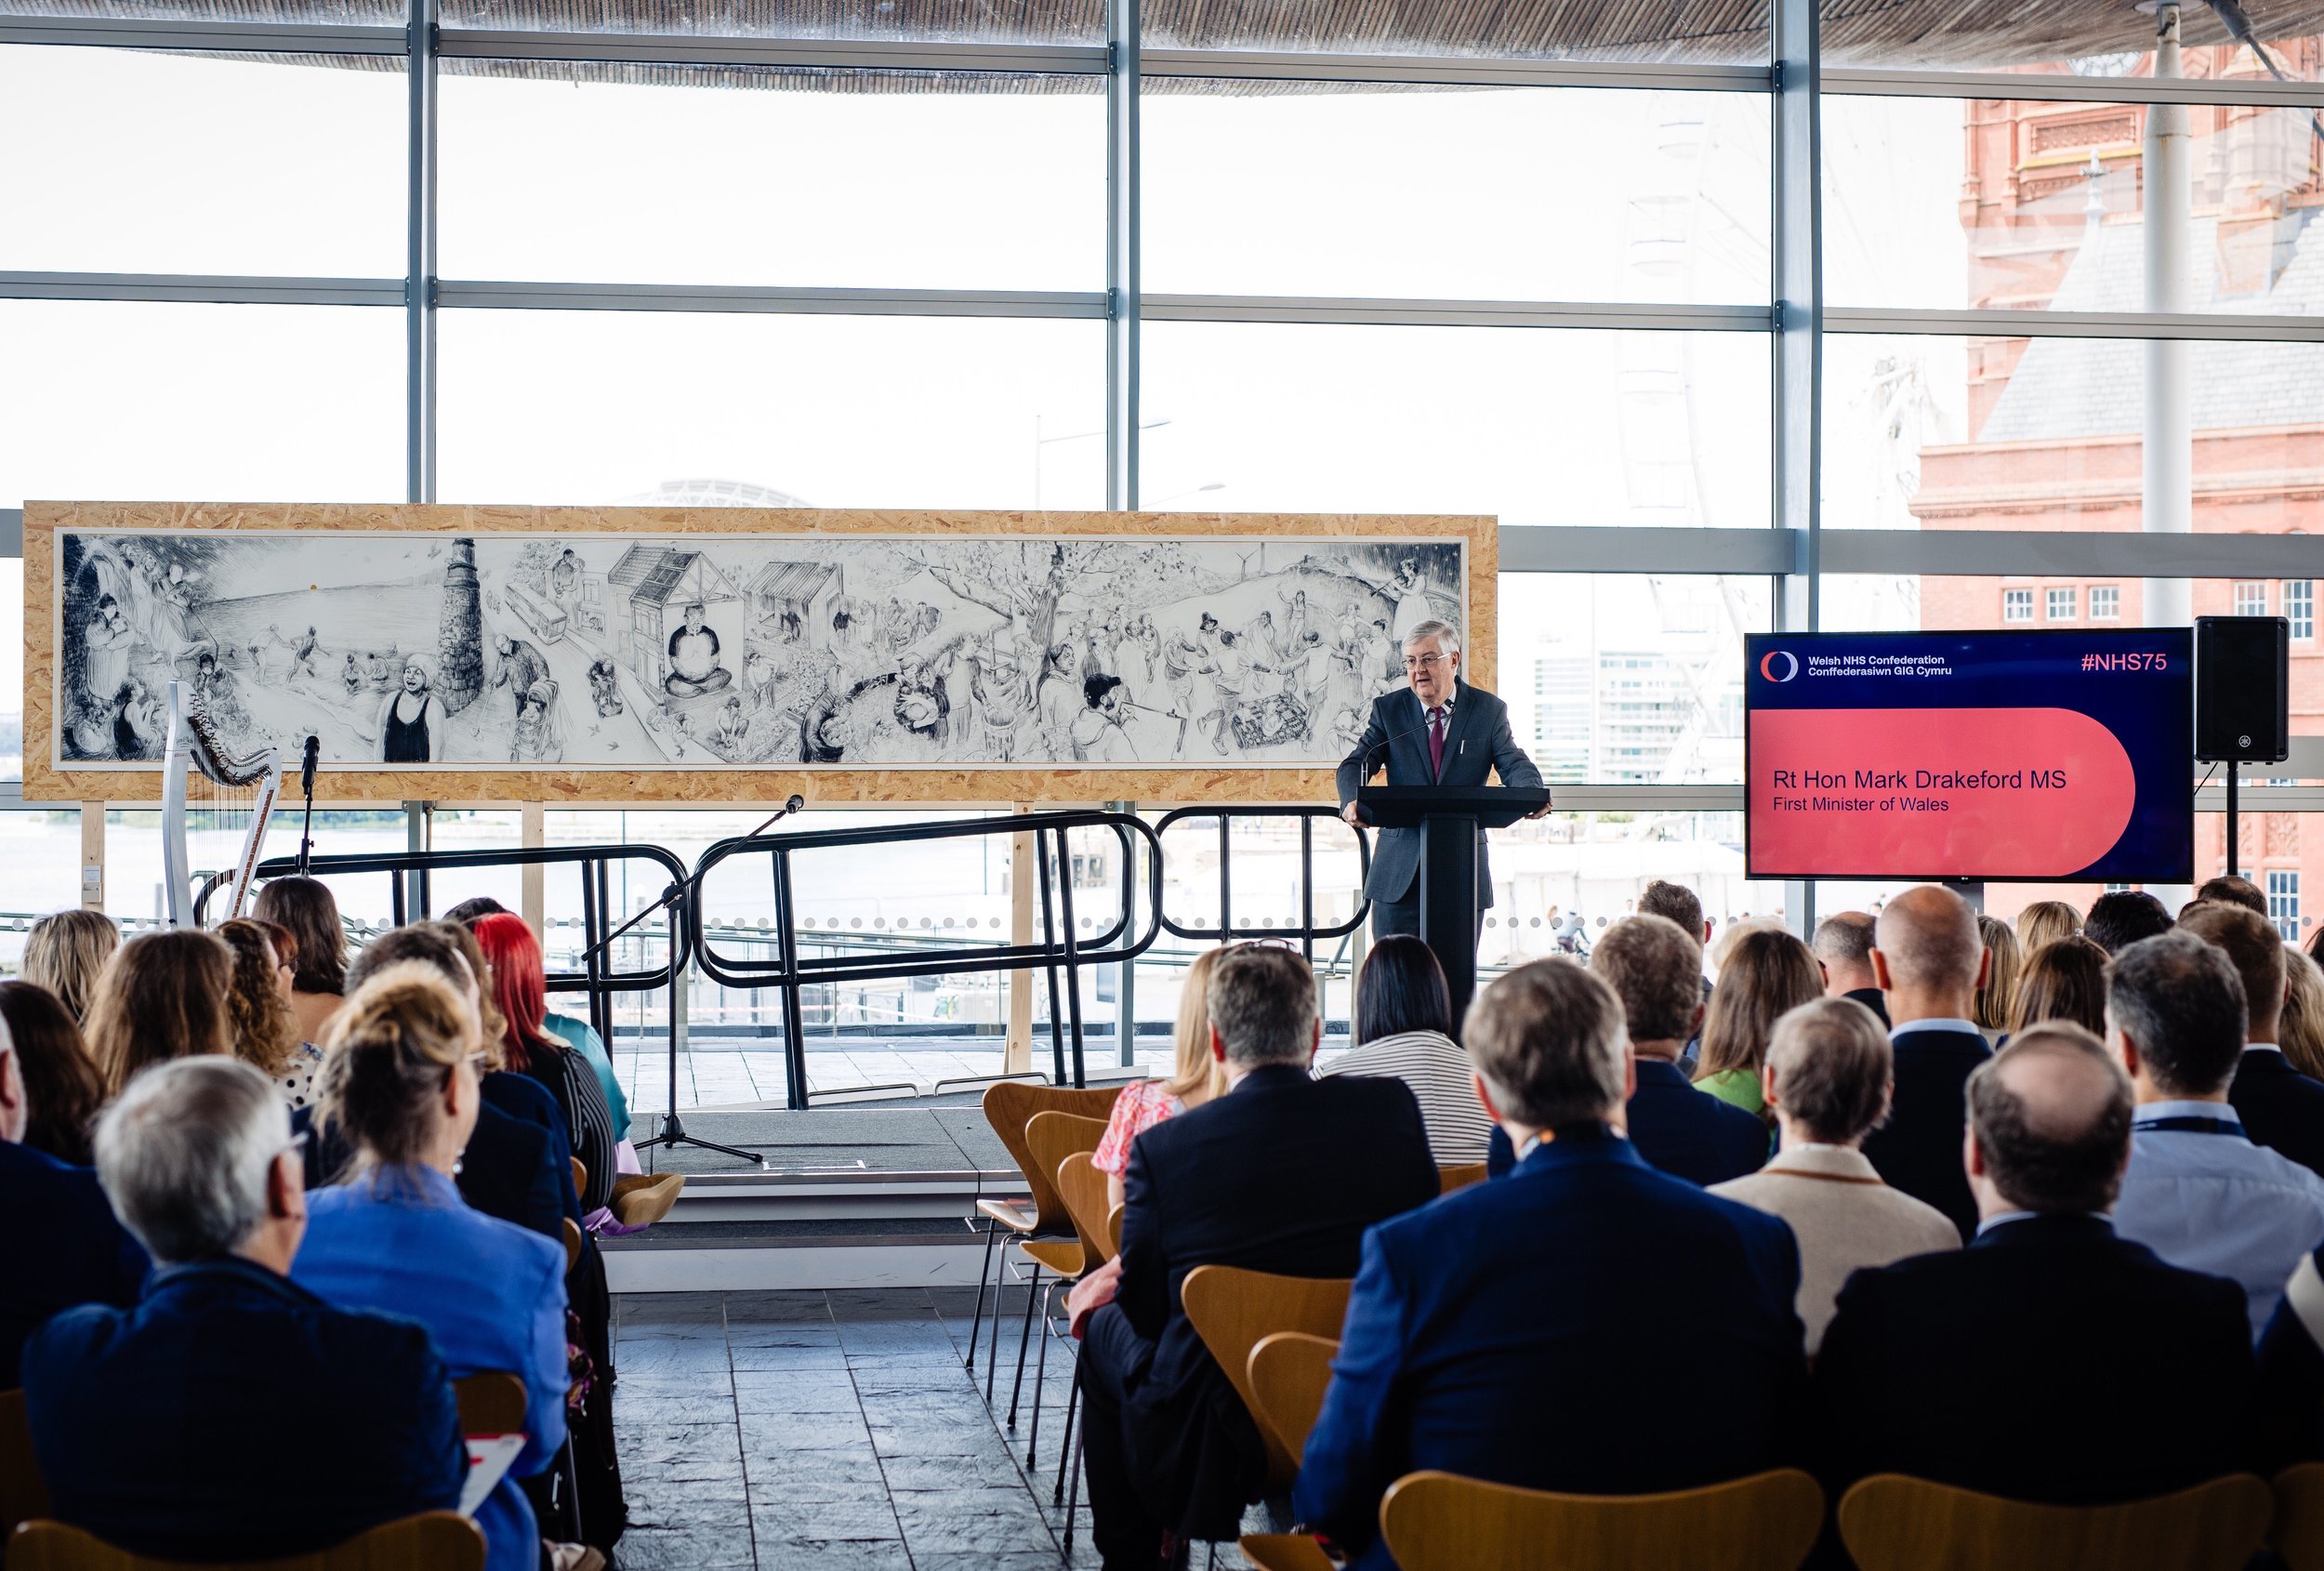  First Minister Mark Drakeford’s speech during the NHS’s 75th Birthday celebrations at the Senedd in Cardiff. 